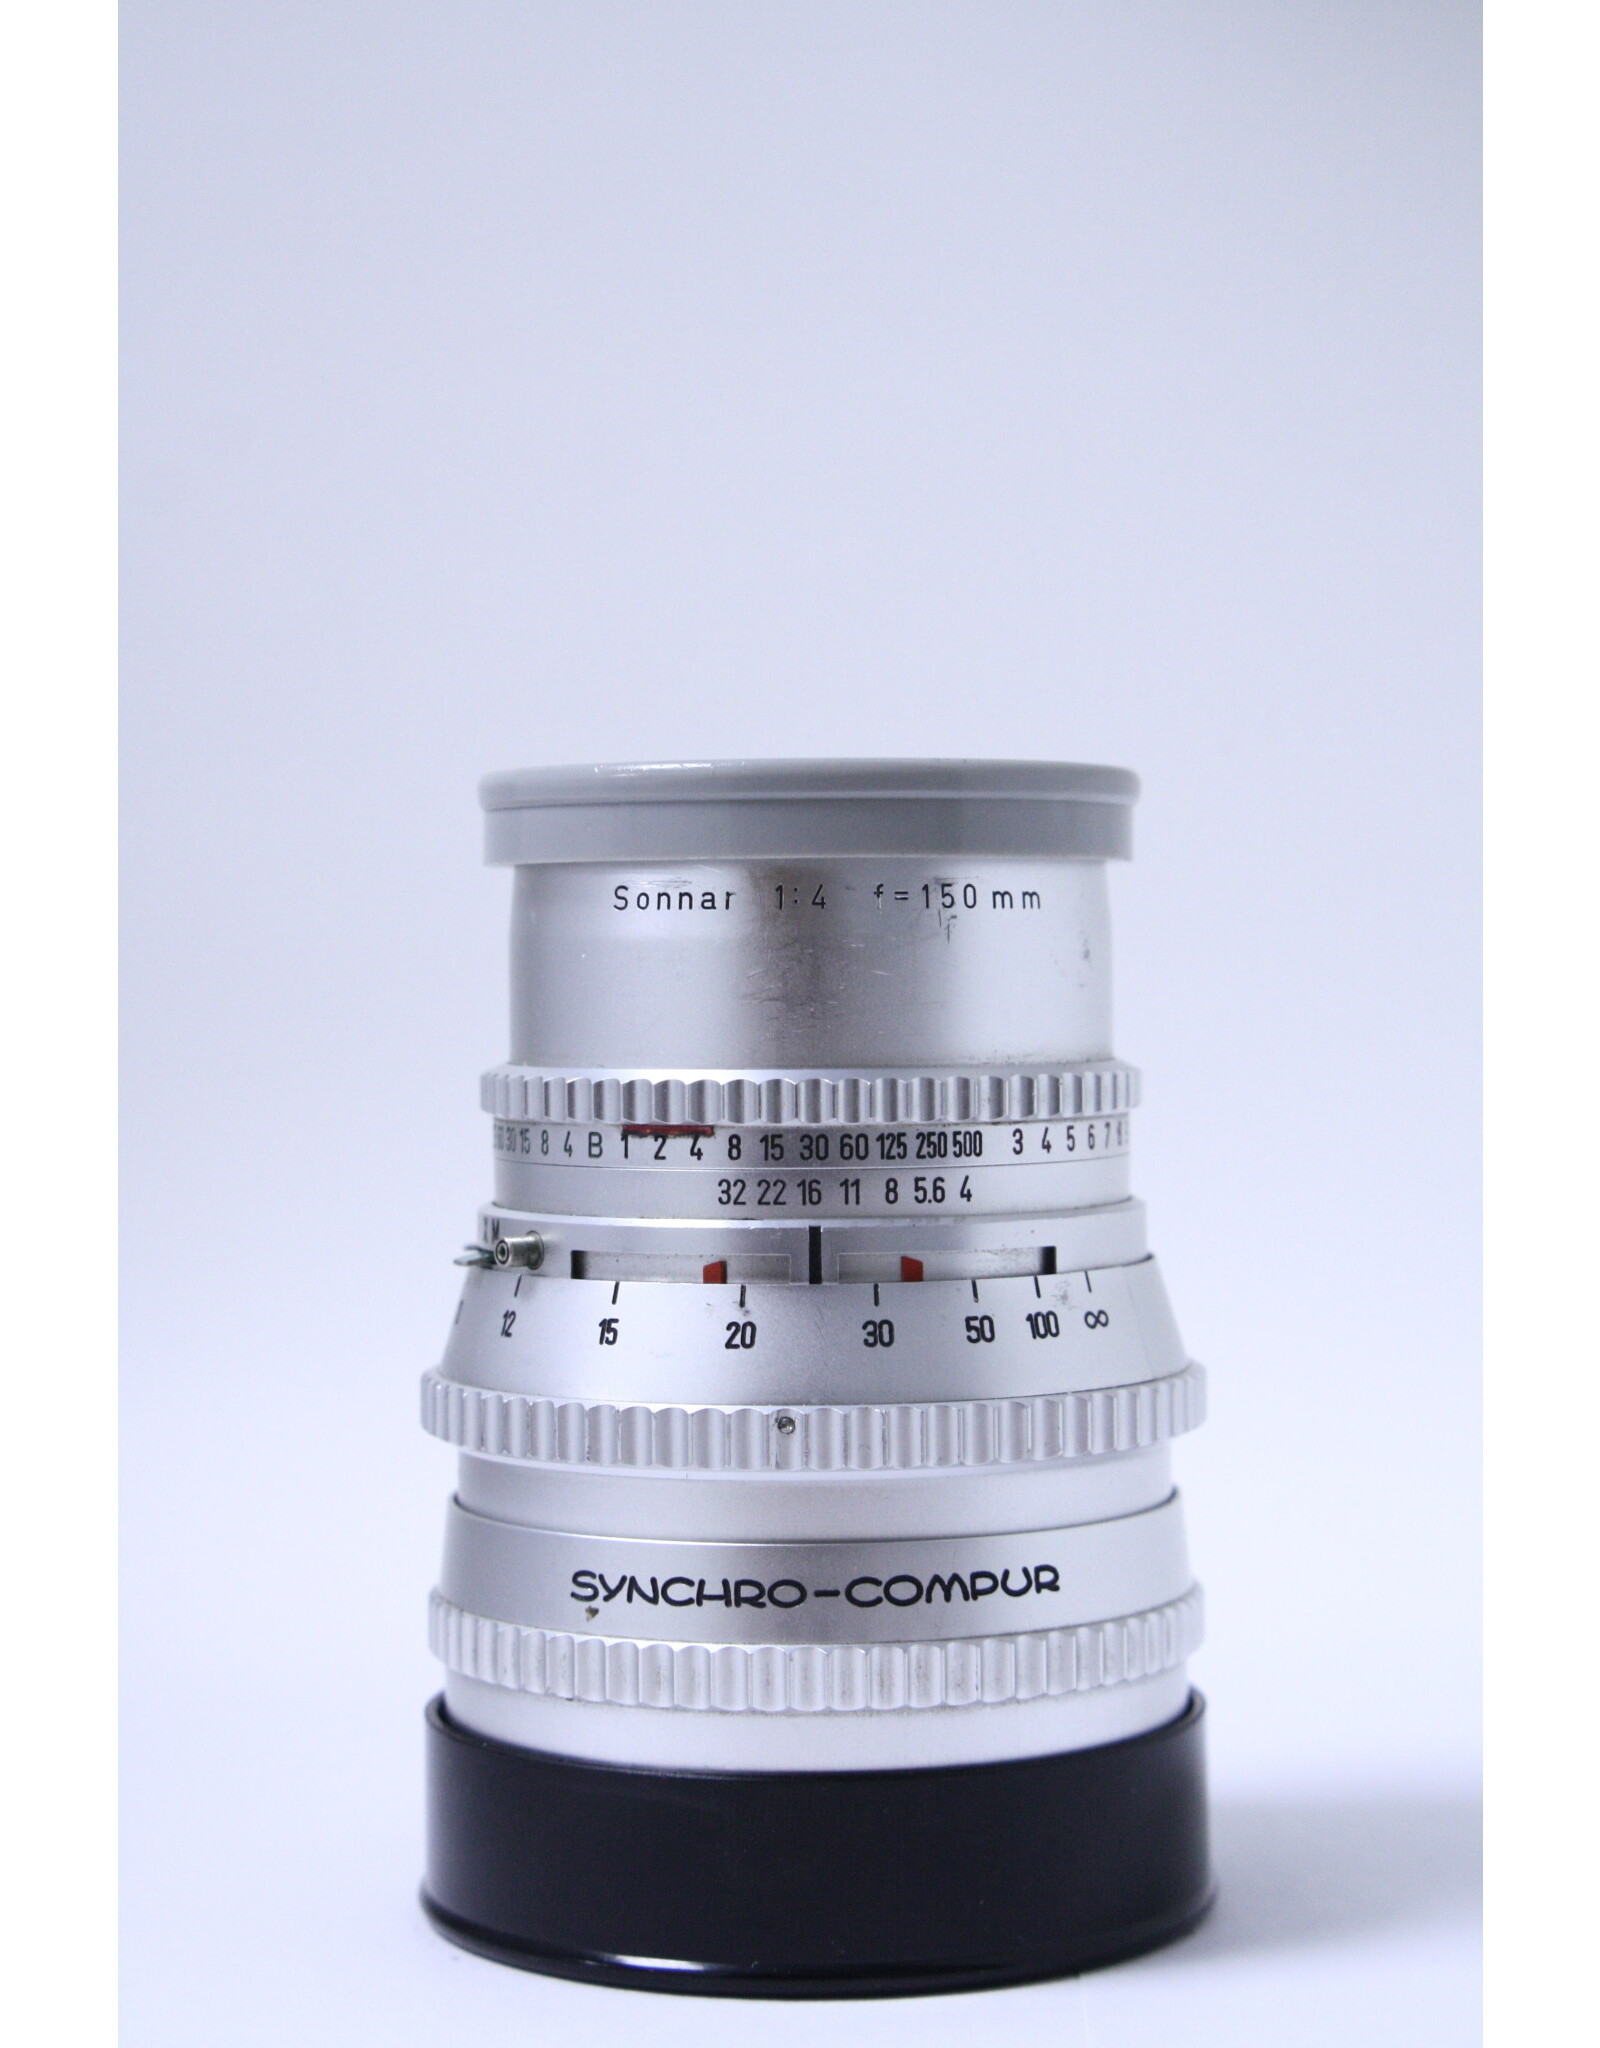 Carl Zeiss Hasselblad Carl Zeiss Sonnar 150mm f4 Chrome Synchro-Compur Lens (Pre-owned)